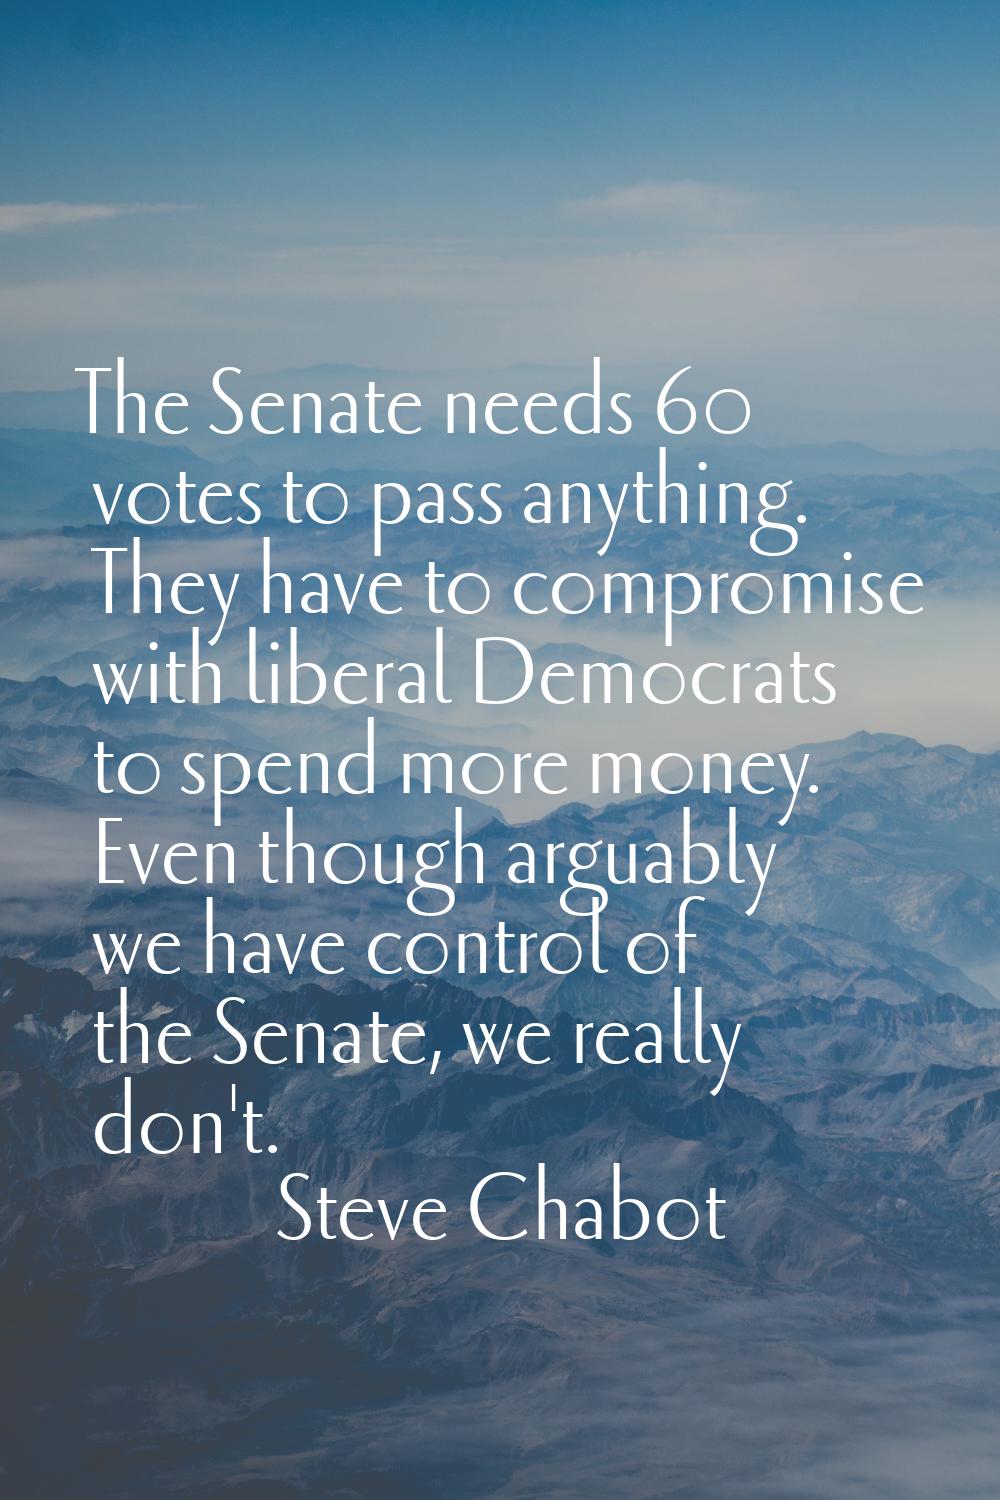 The Senate needs 60 votes to pass anything. They have to compromise with liberal Democrats to spend